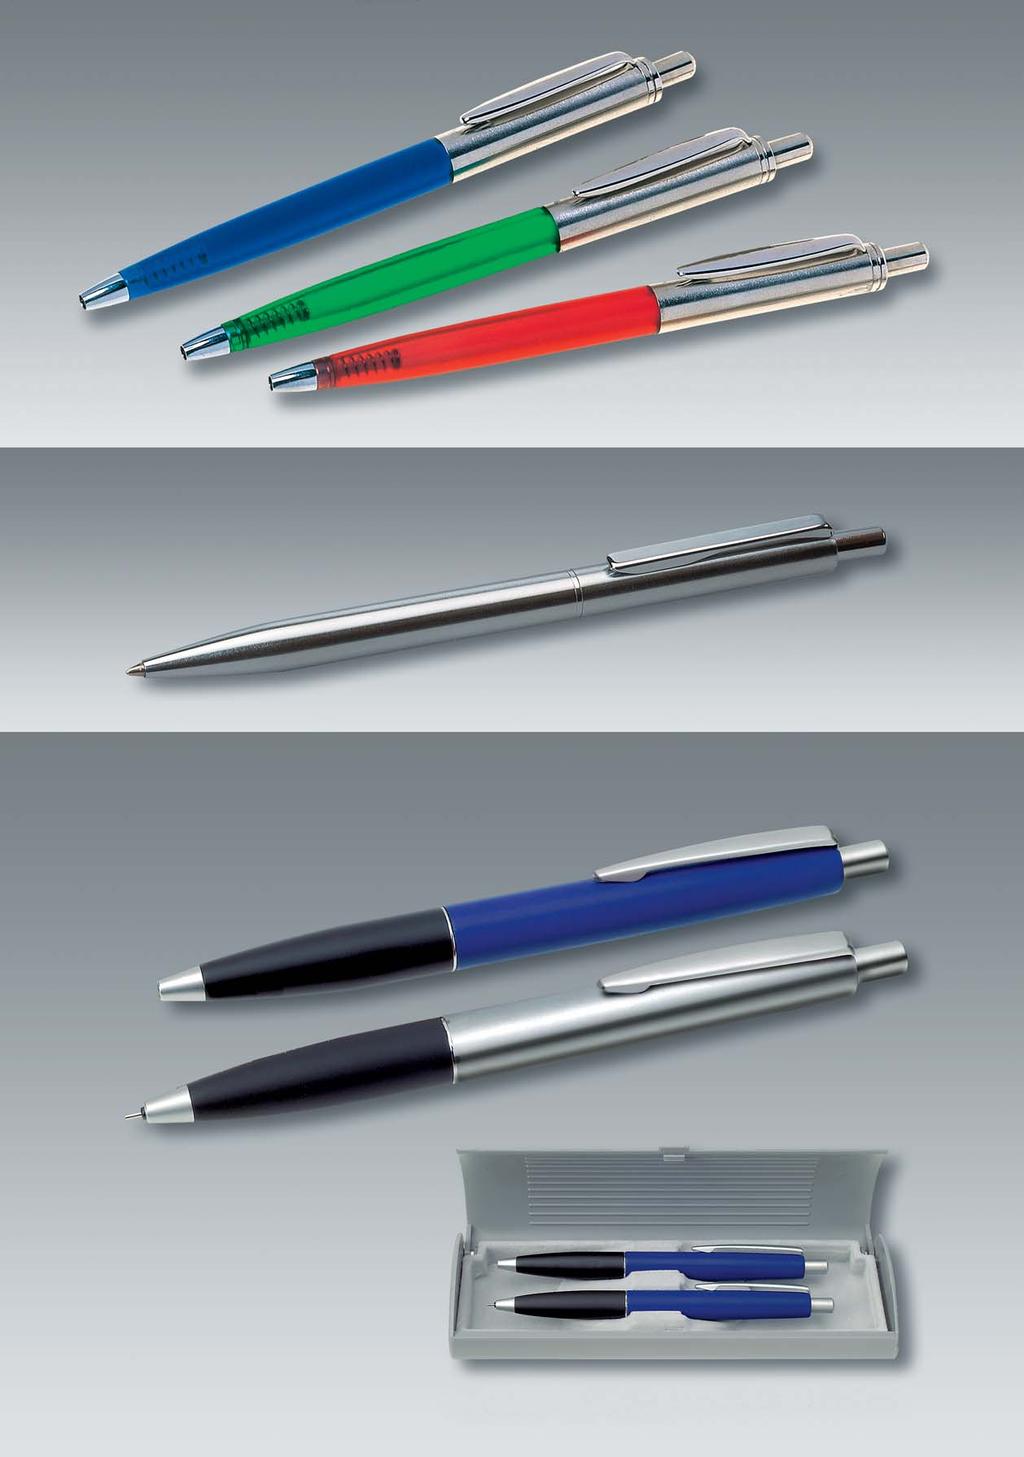 advertising: f on upper part d on front part Article 303: half metal ball pen, upper part metal, front part in frosted colors green, blue, red Int.